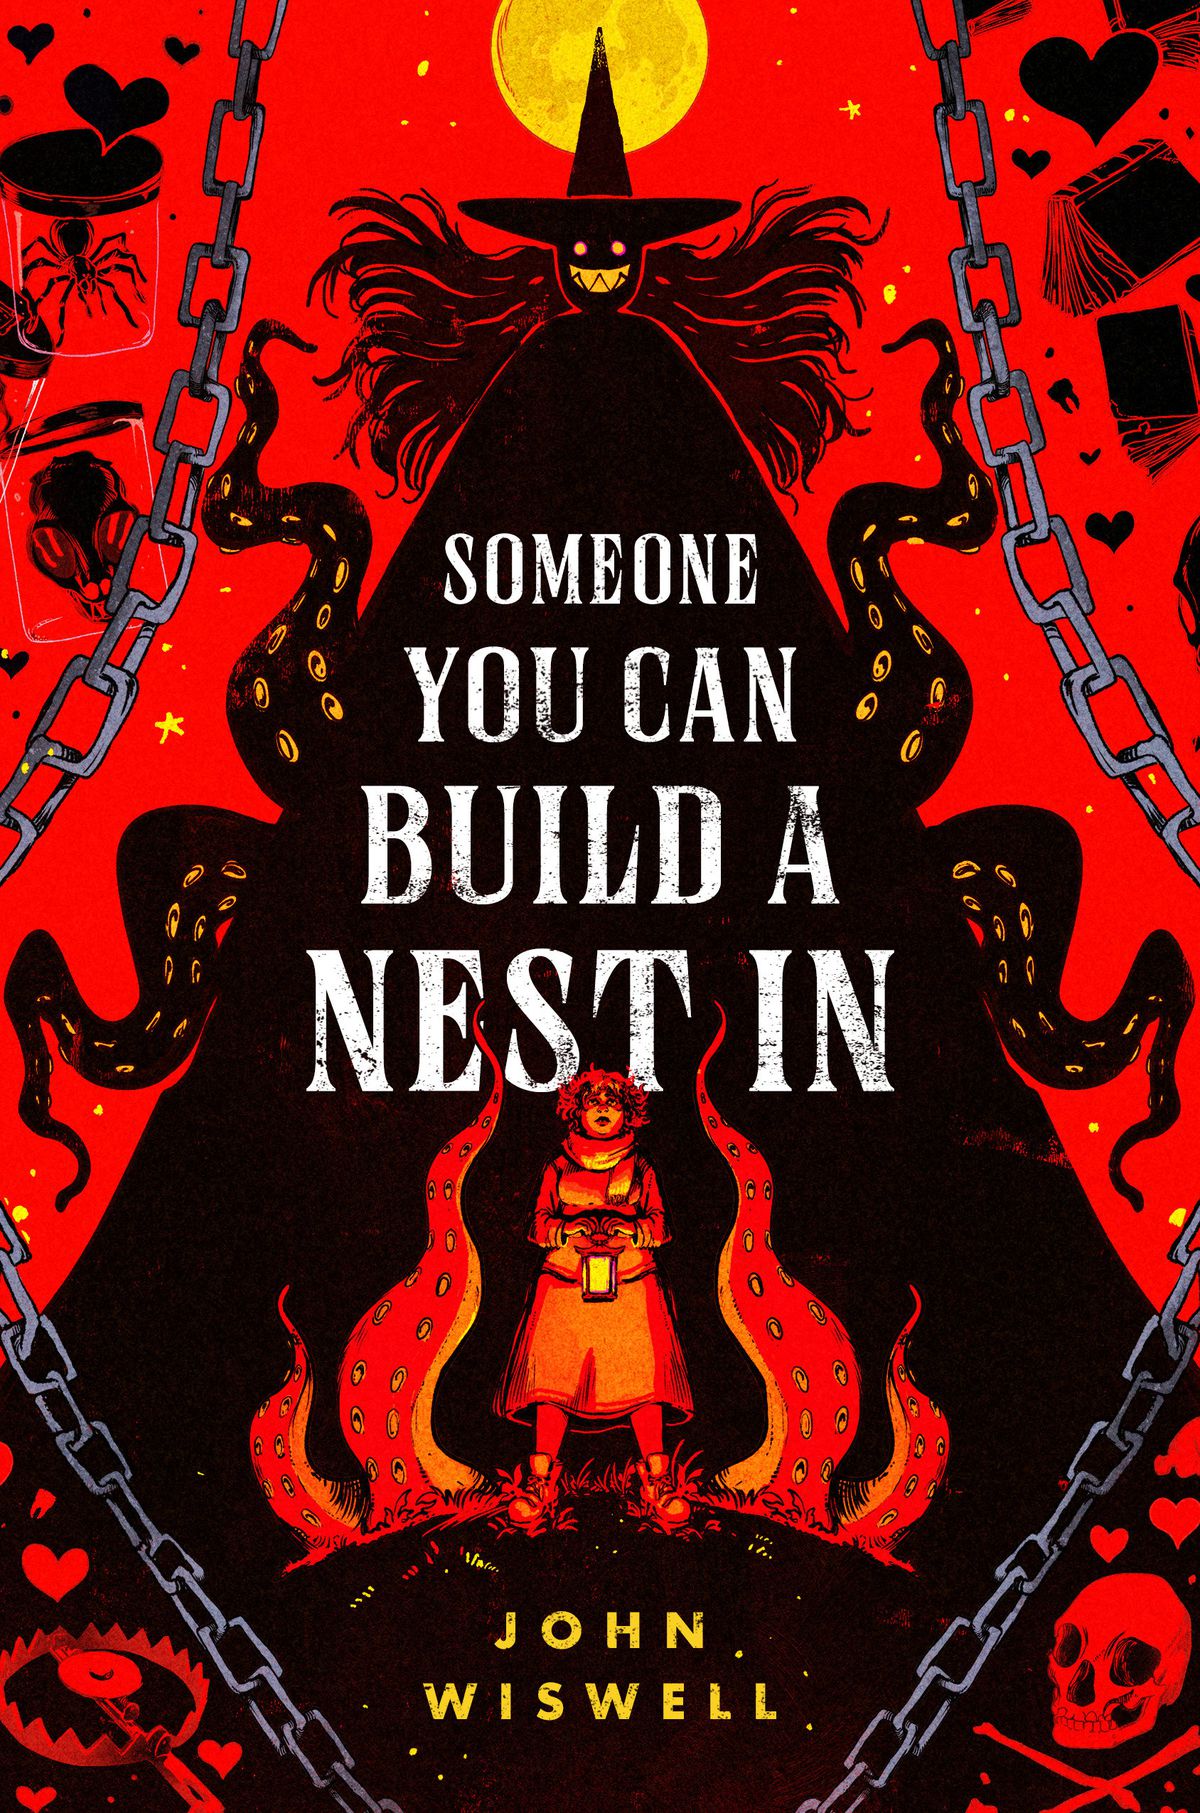 The cover of John Wiswell’s novel Someone You Can Build A Nest In, showing a grinning black shadowy figure in a pointed witch’s hat looming above a small female figure in red light, holding a lantern and surrounded by red tentacles. This version has the title and author’s name.